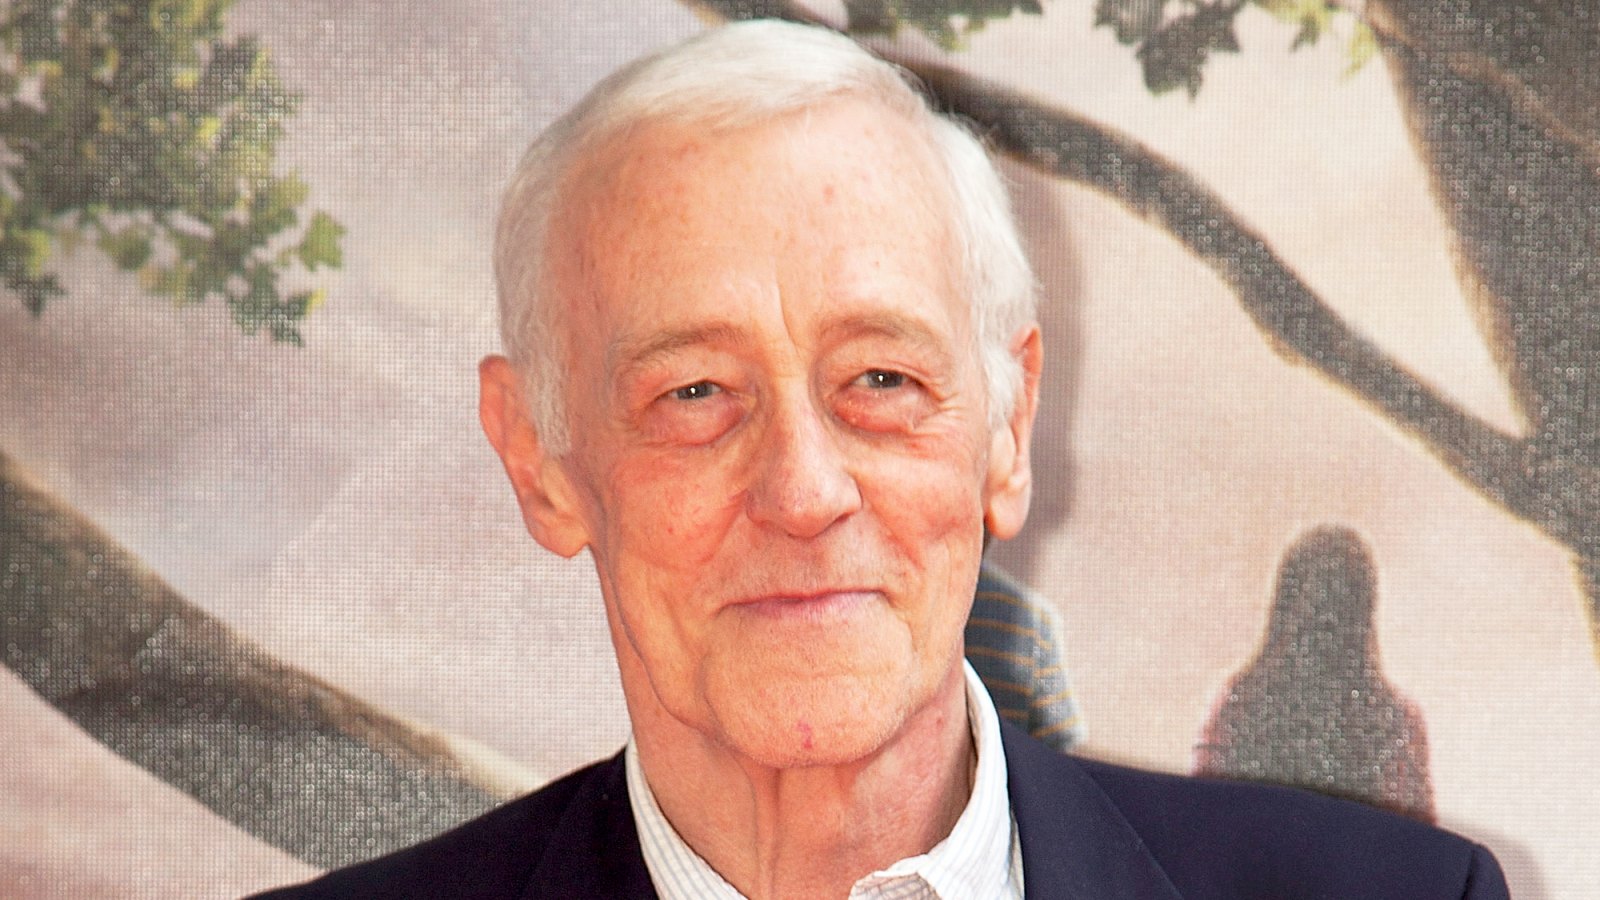 John Mahoney attends the 2010 premiere of "Flipped" at the Hilbert Circle Theatre in Indianapolis, Indiana.